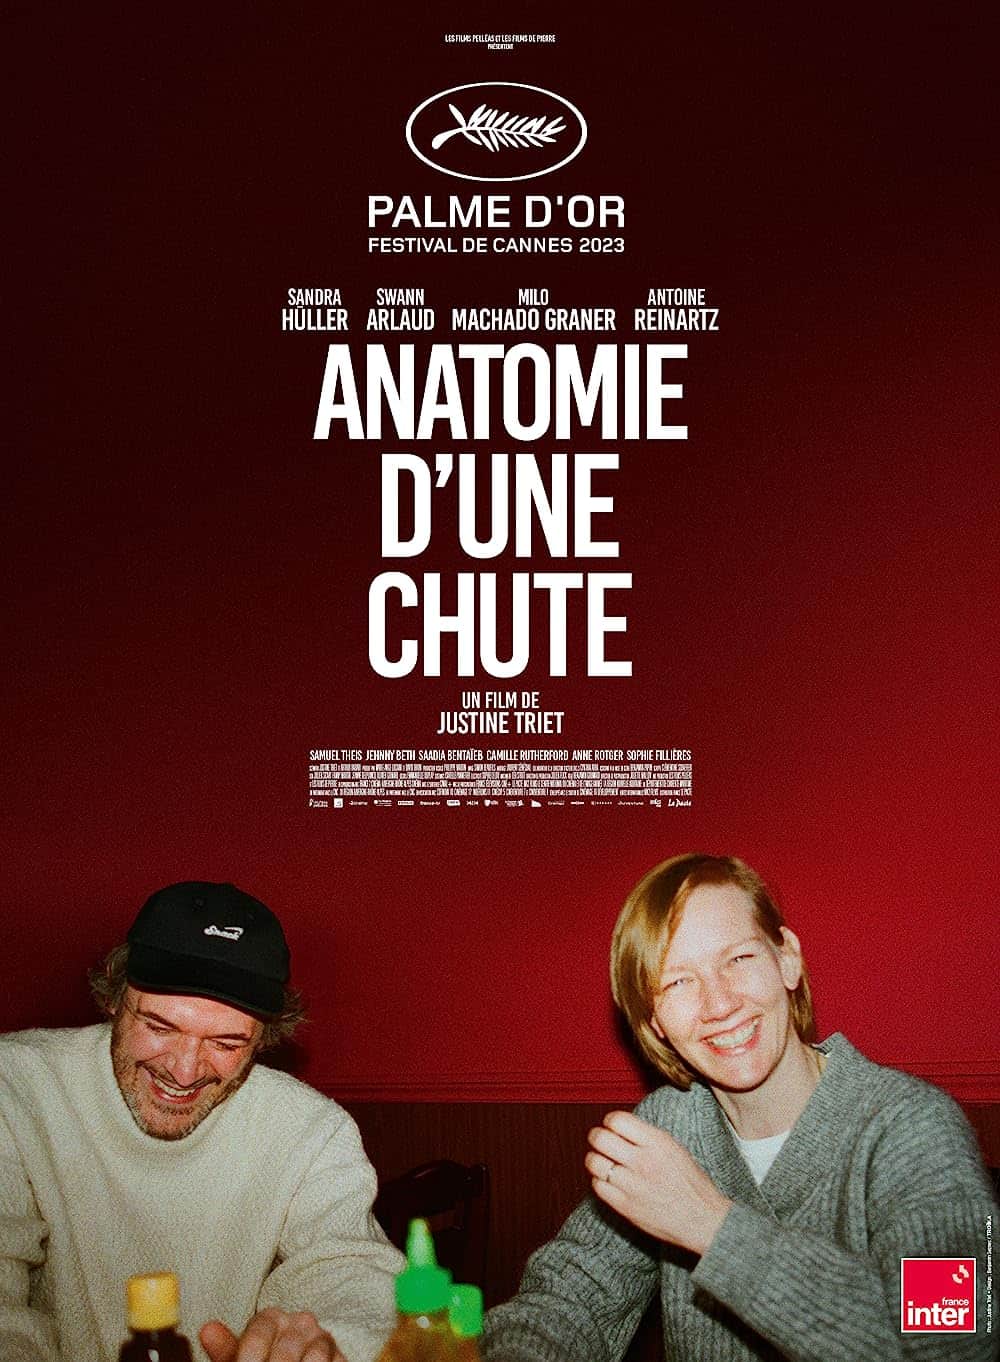 Anatomie d'une chute Movie (2023) Cast, Release Date, Story, Budget, Collection, Poster, Trailer, Review